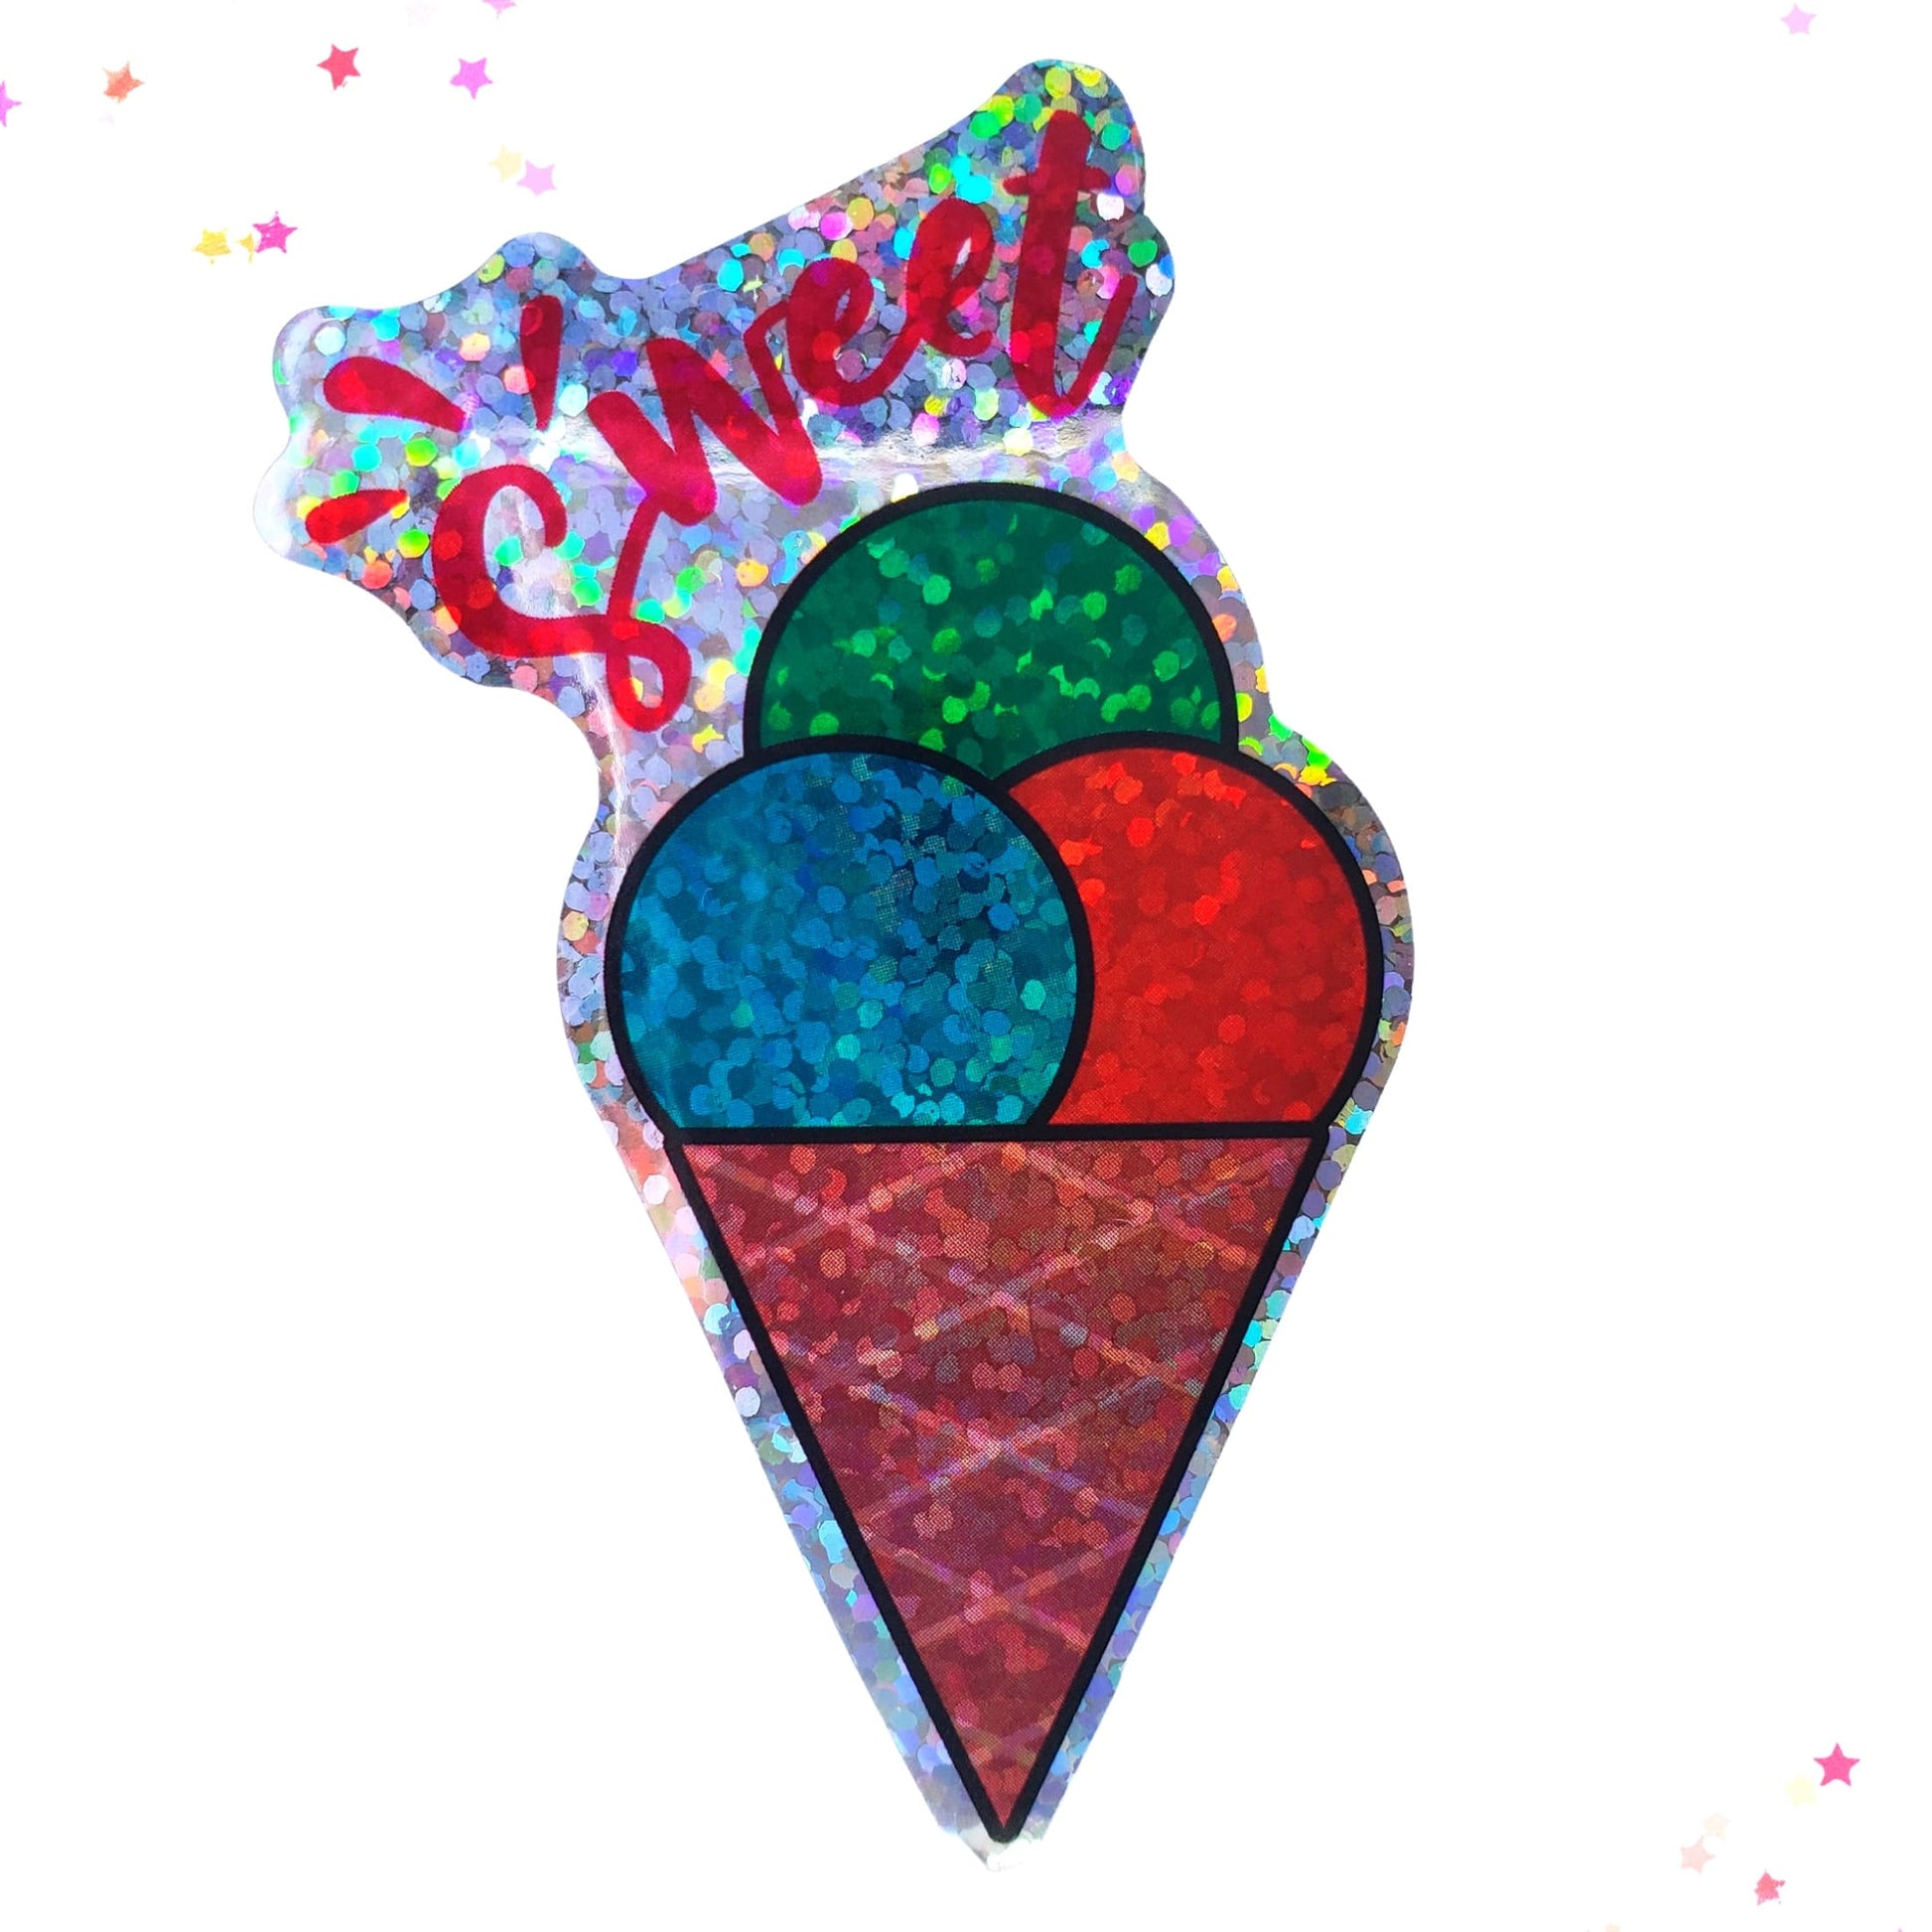 Premium Sticker - Sparkly Holographic Glitter Sweet Triple Scoop Ice Cream Cone from Confetti Kitty, Only 2.00